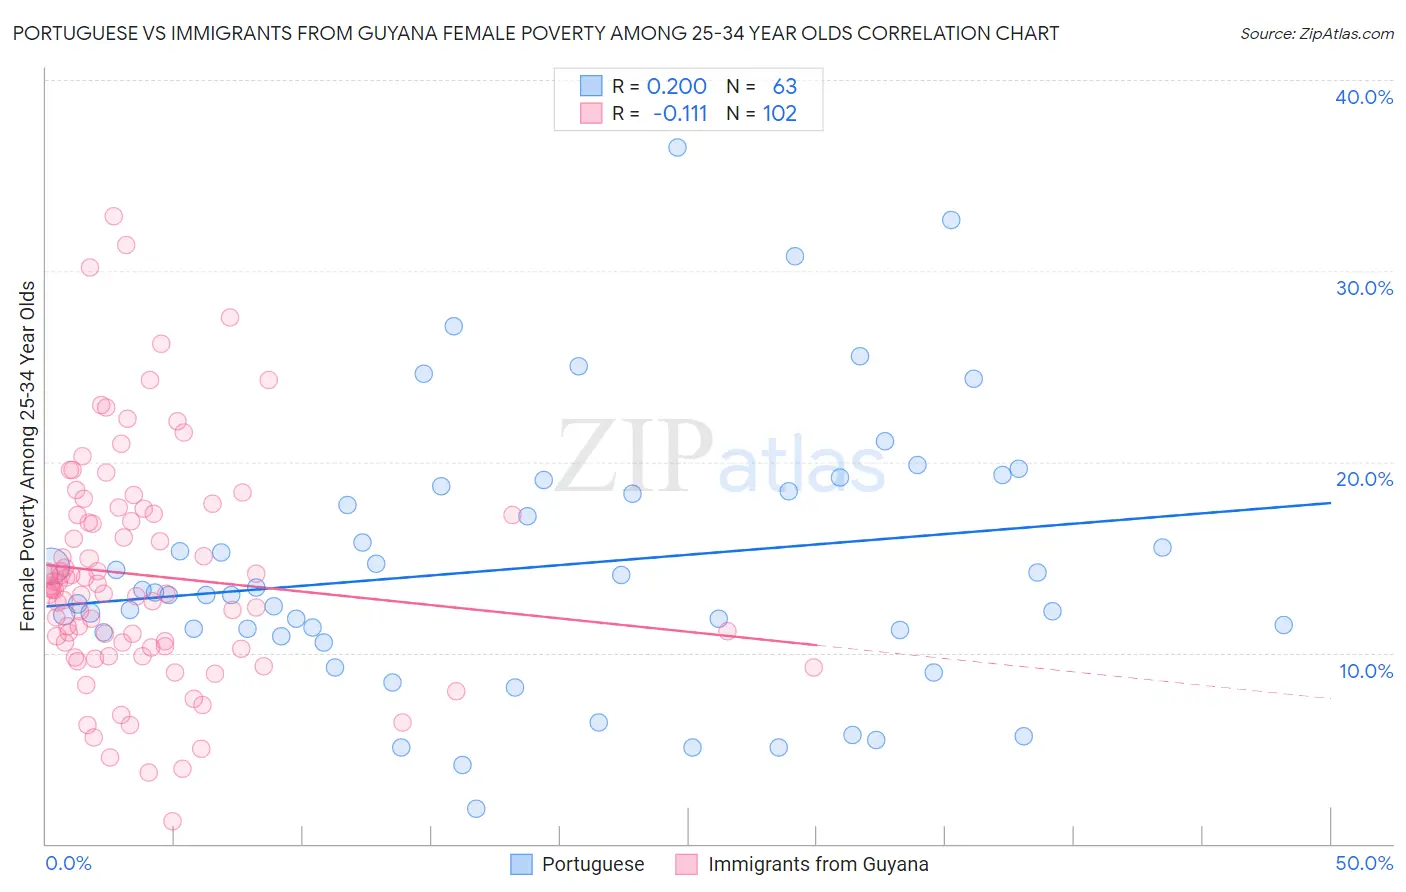 Portuguese vs Immigrants from Guyana Female Poverty Among 25-34 Year Olds